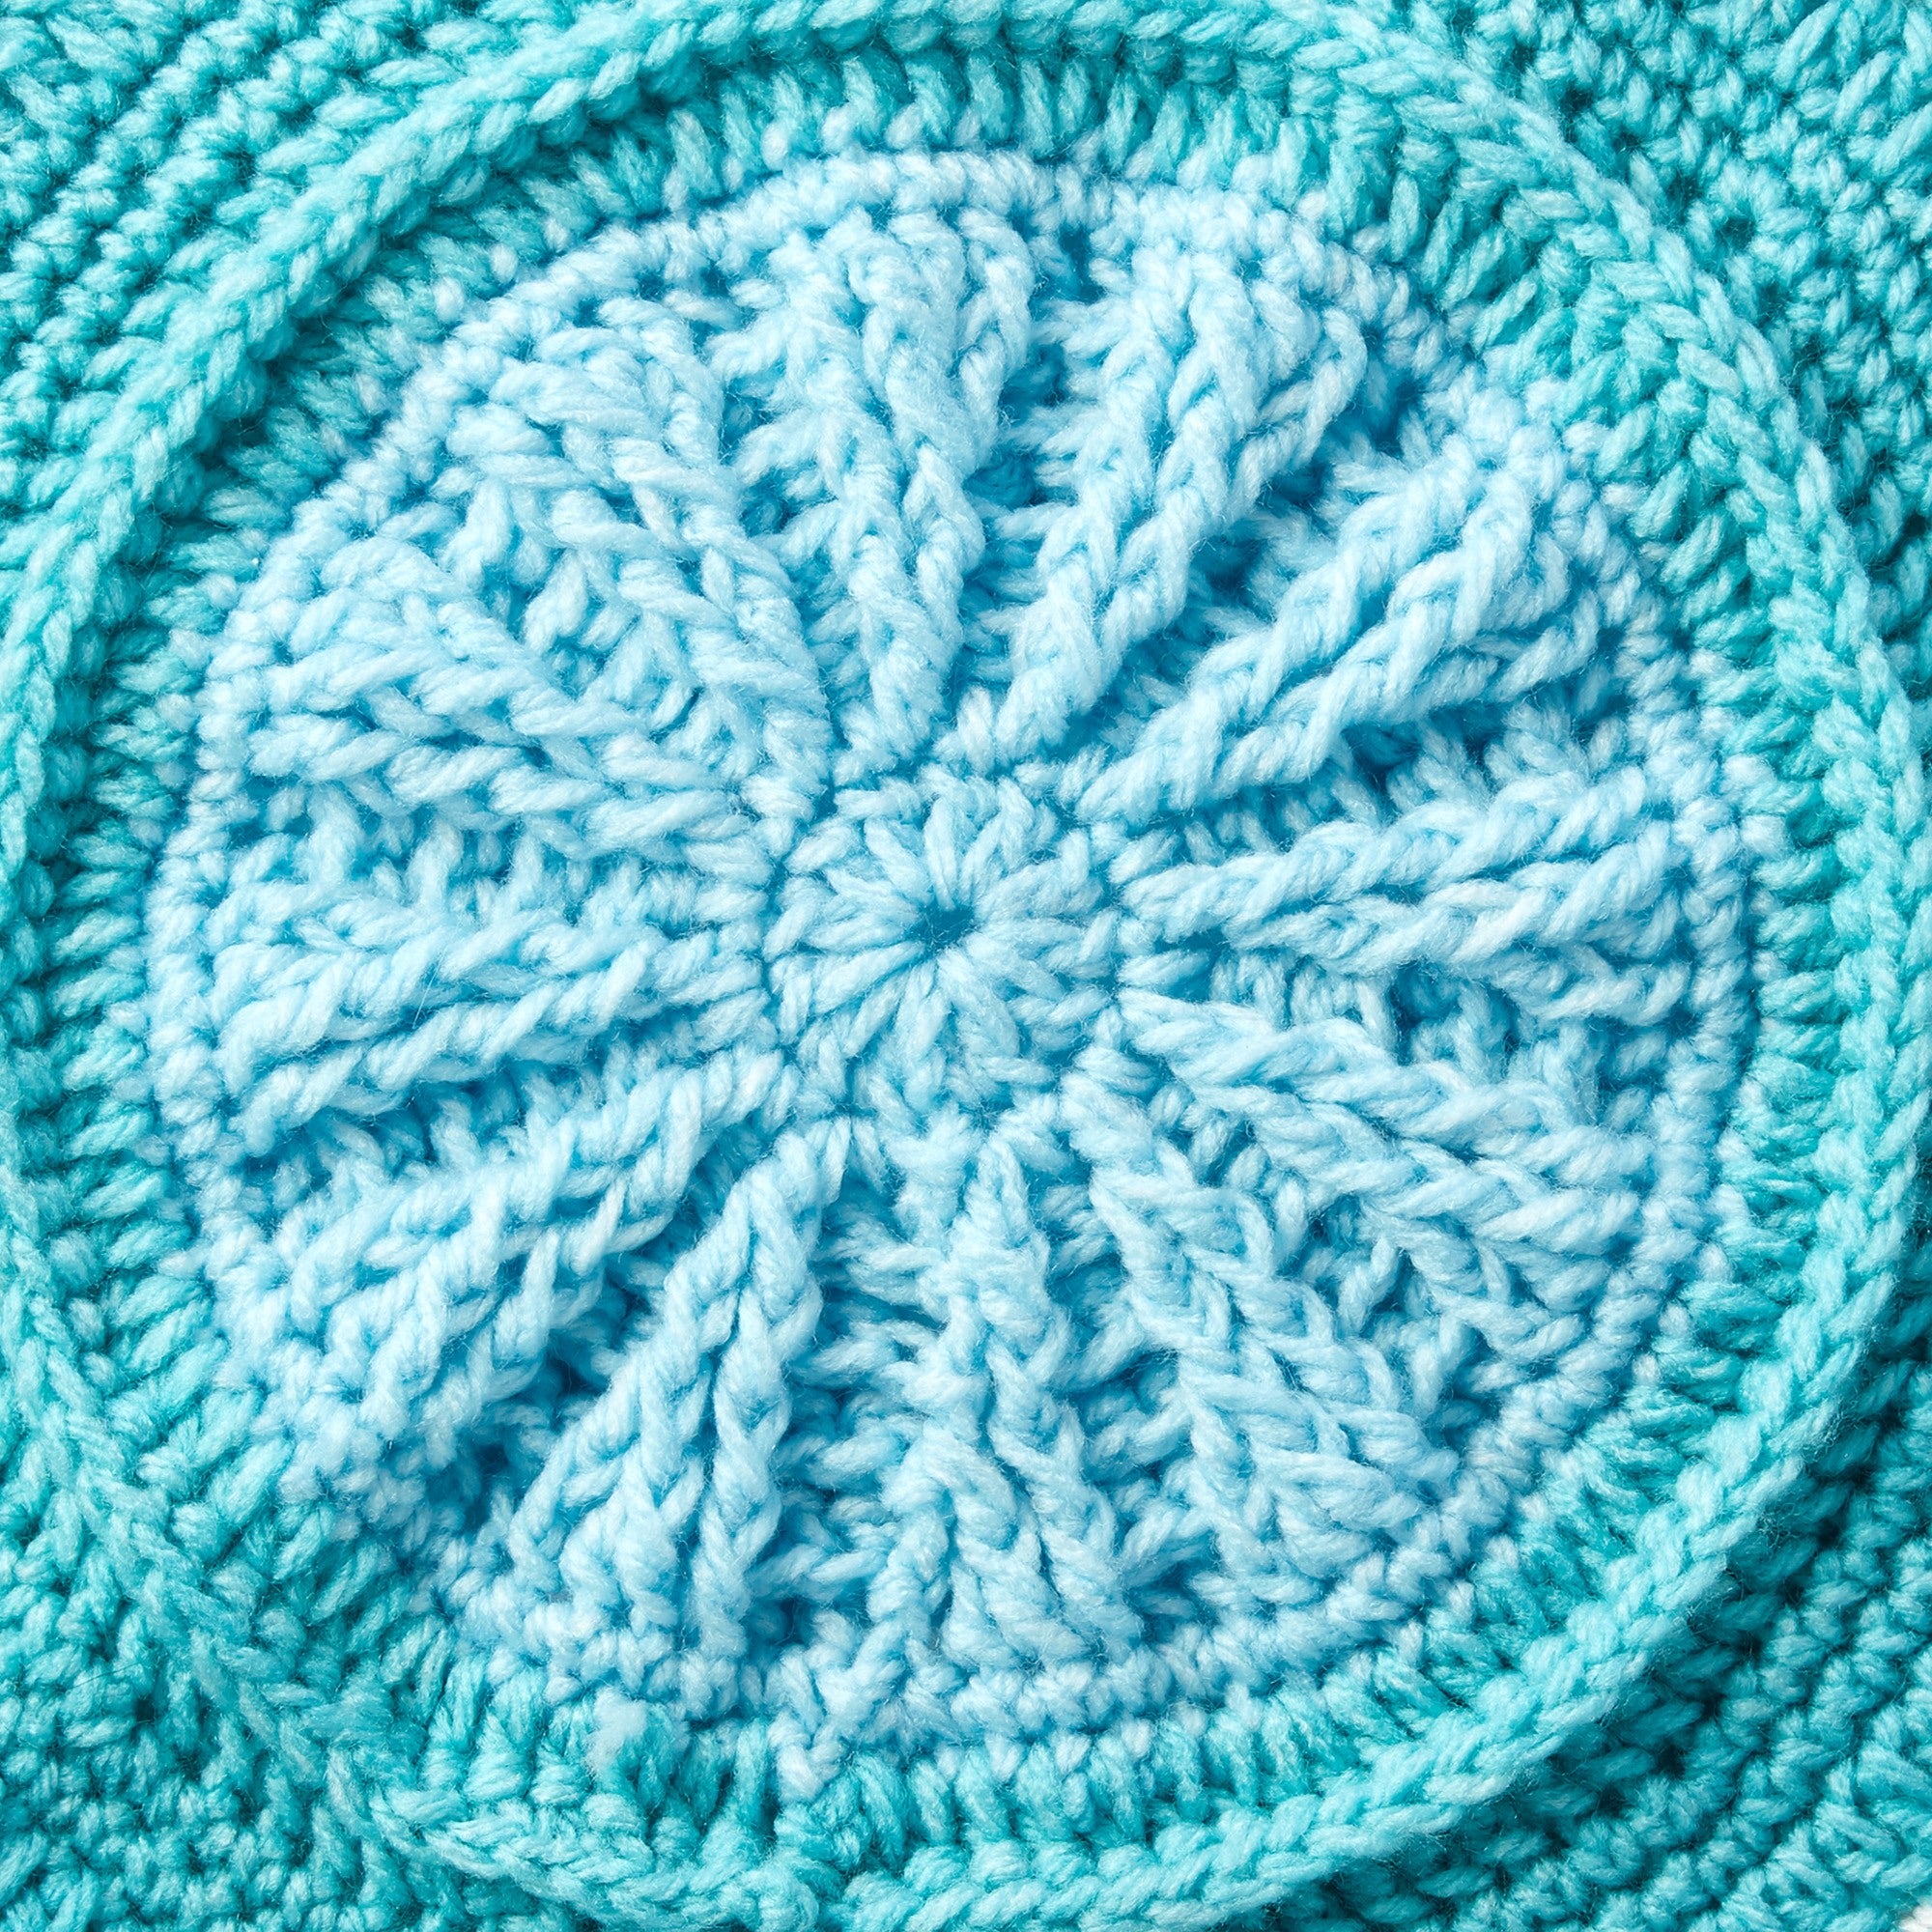 Study of Earth Afghan Crochet Along with The Crochet Crowd